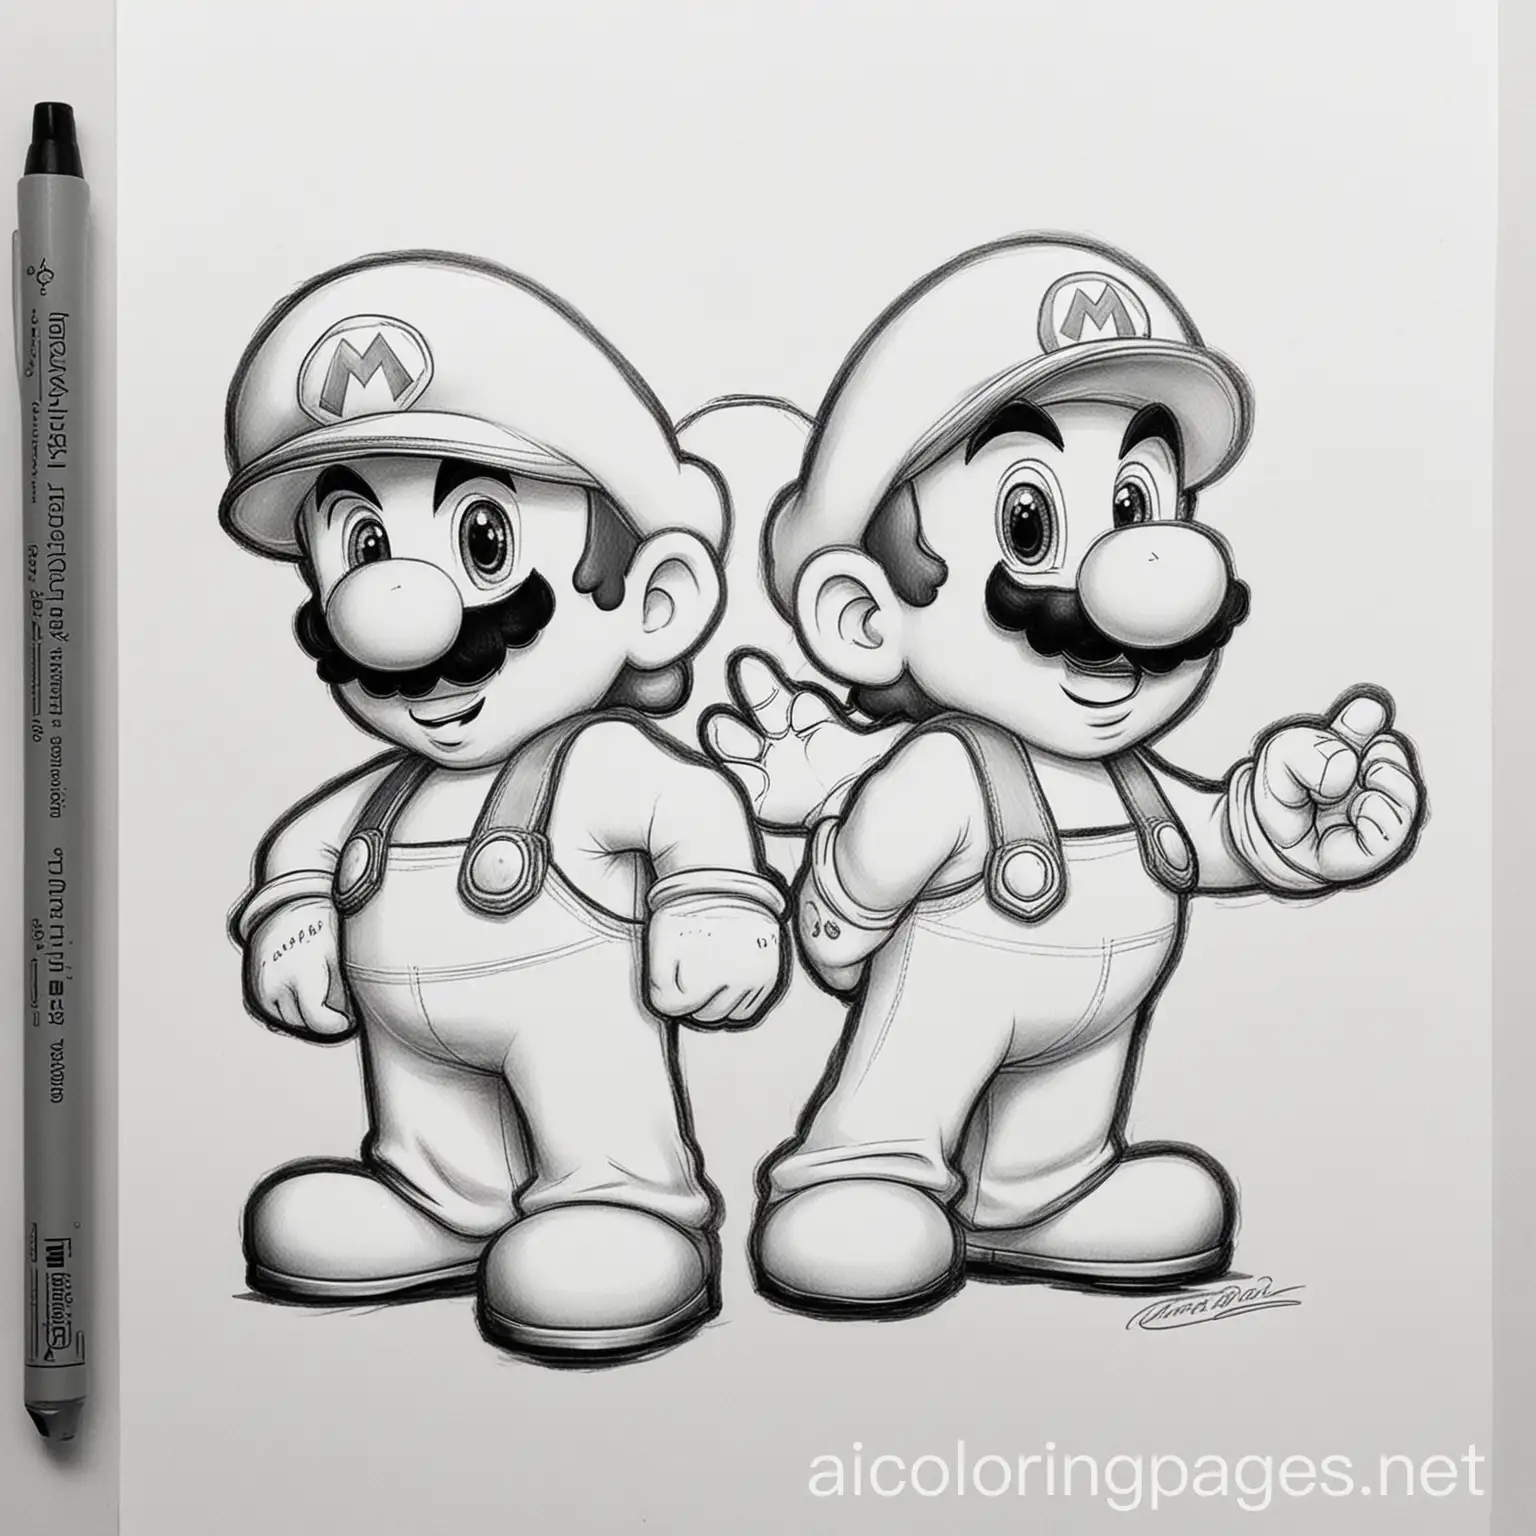 Mario-and-Luigi-Coloring-Page-Black-and-White-Line-Art-on-White-Background